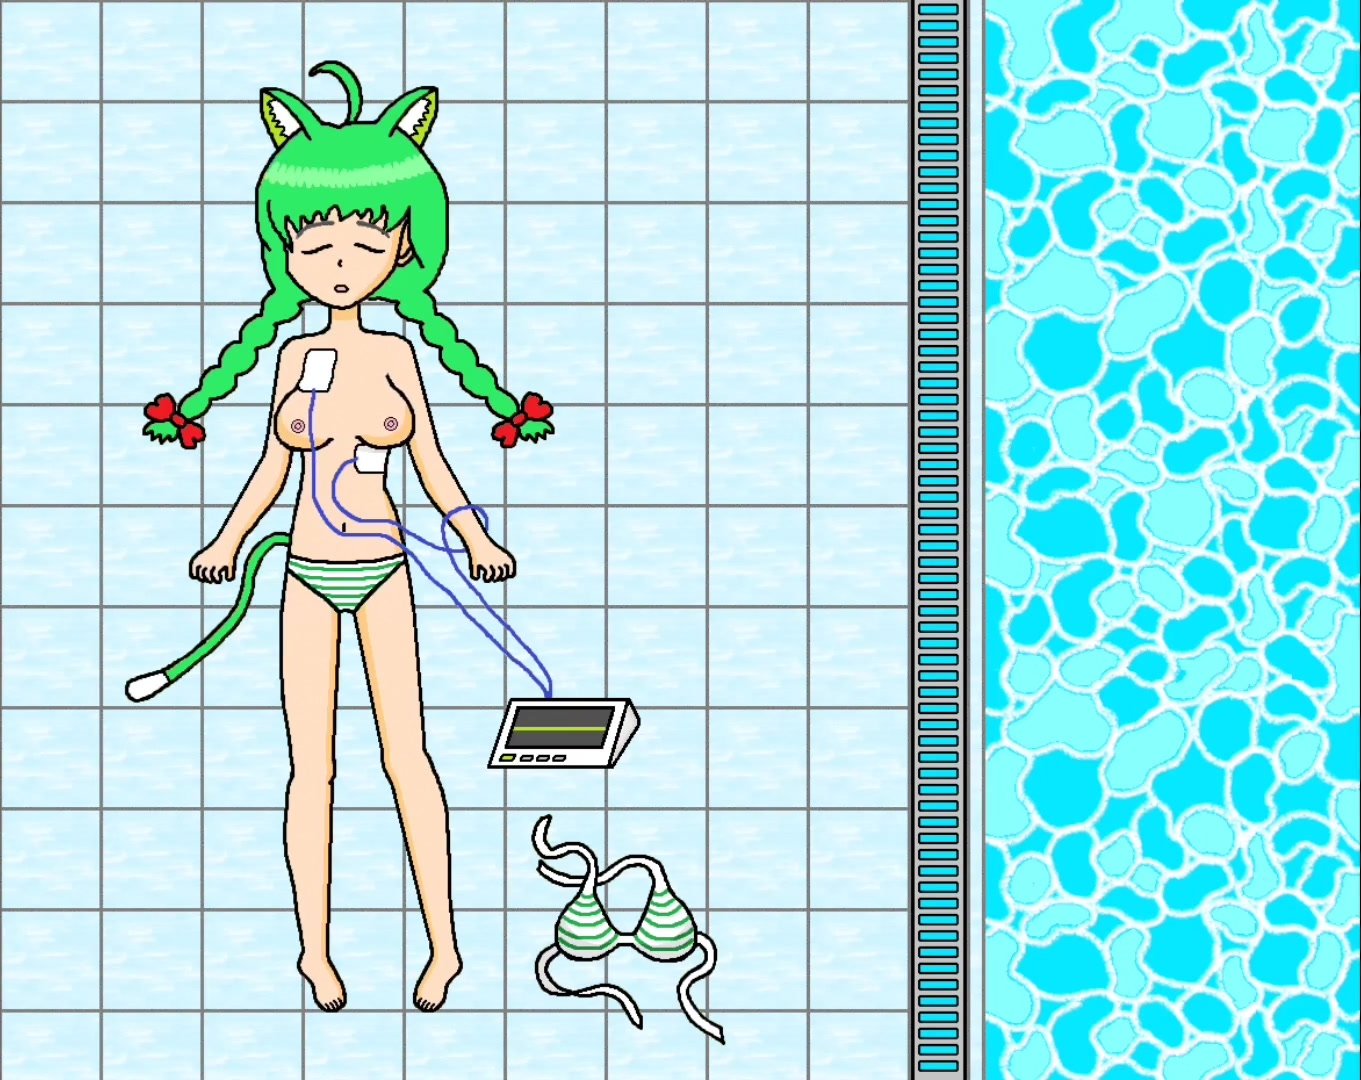 WinME-chan poolside heart attack